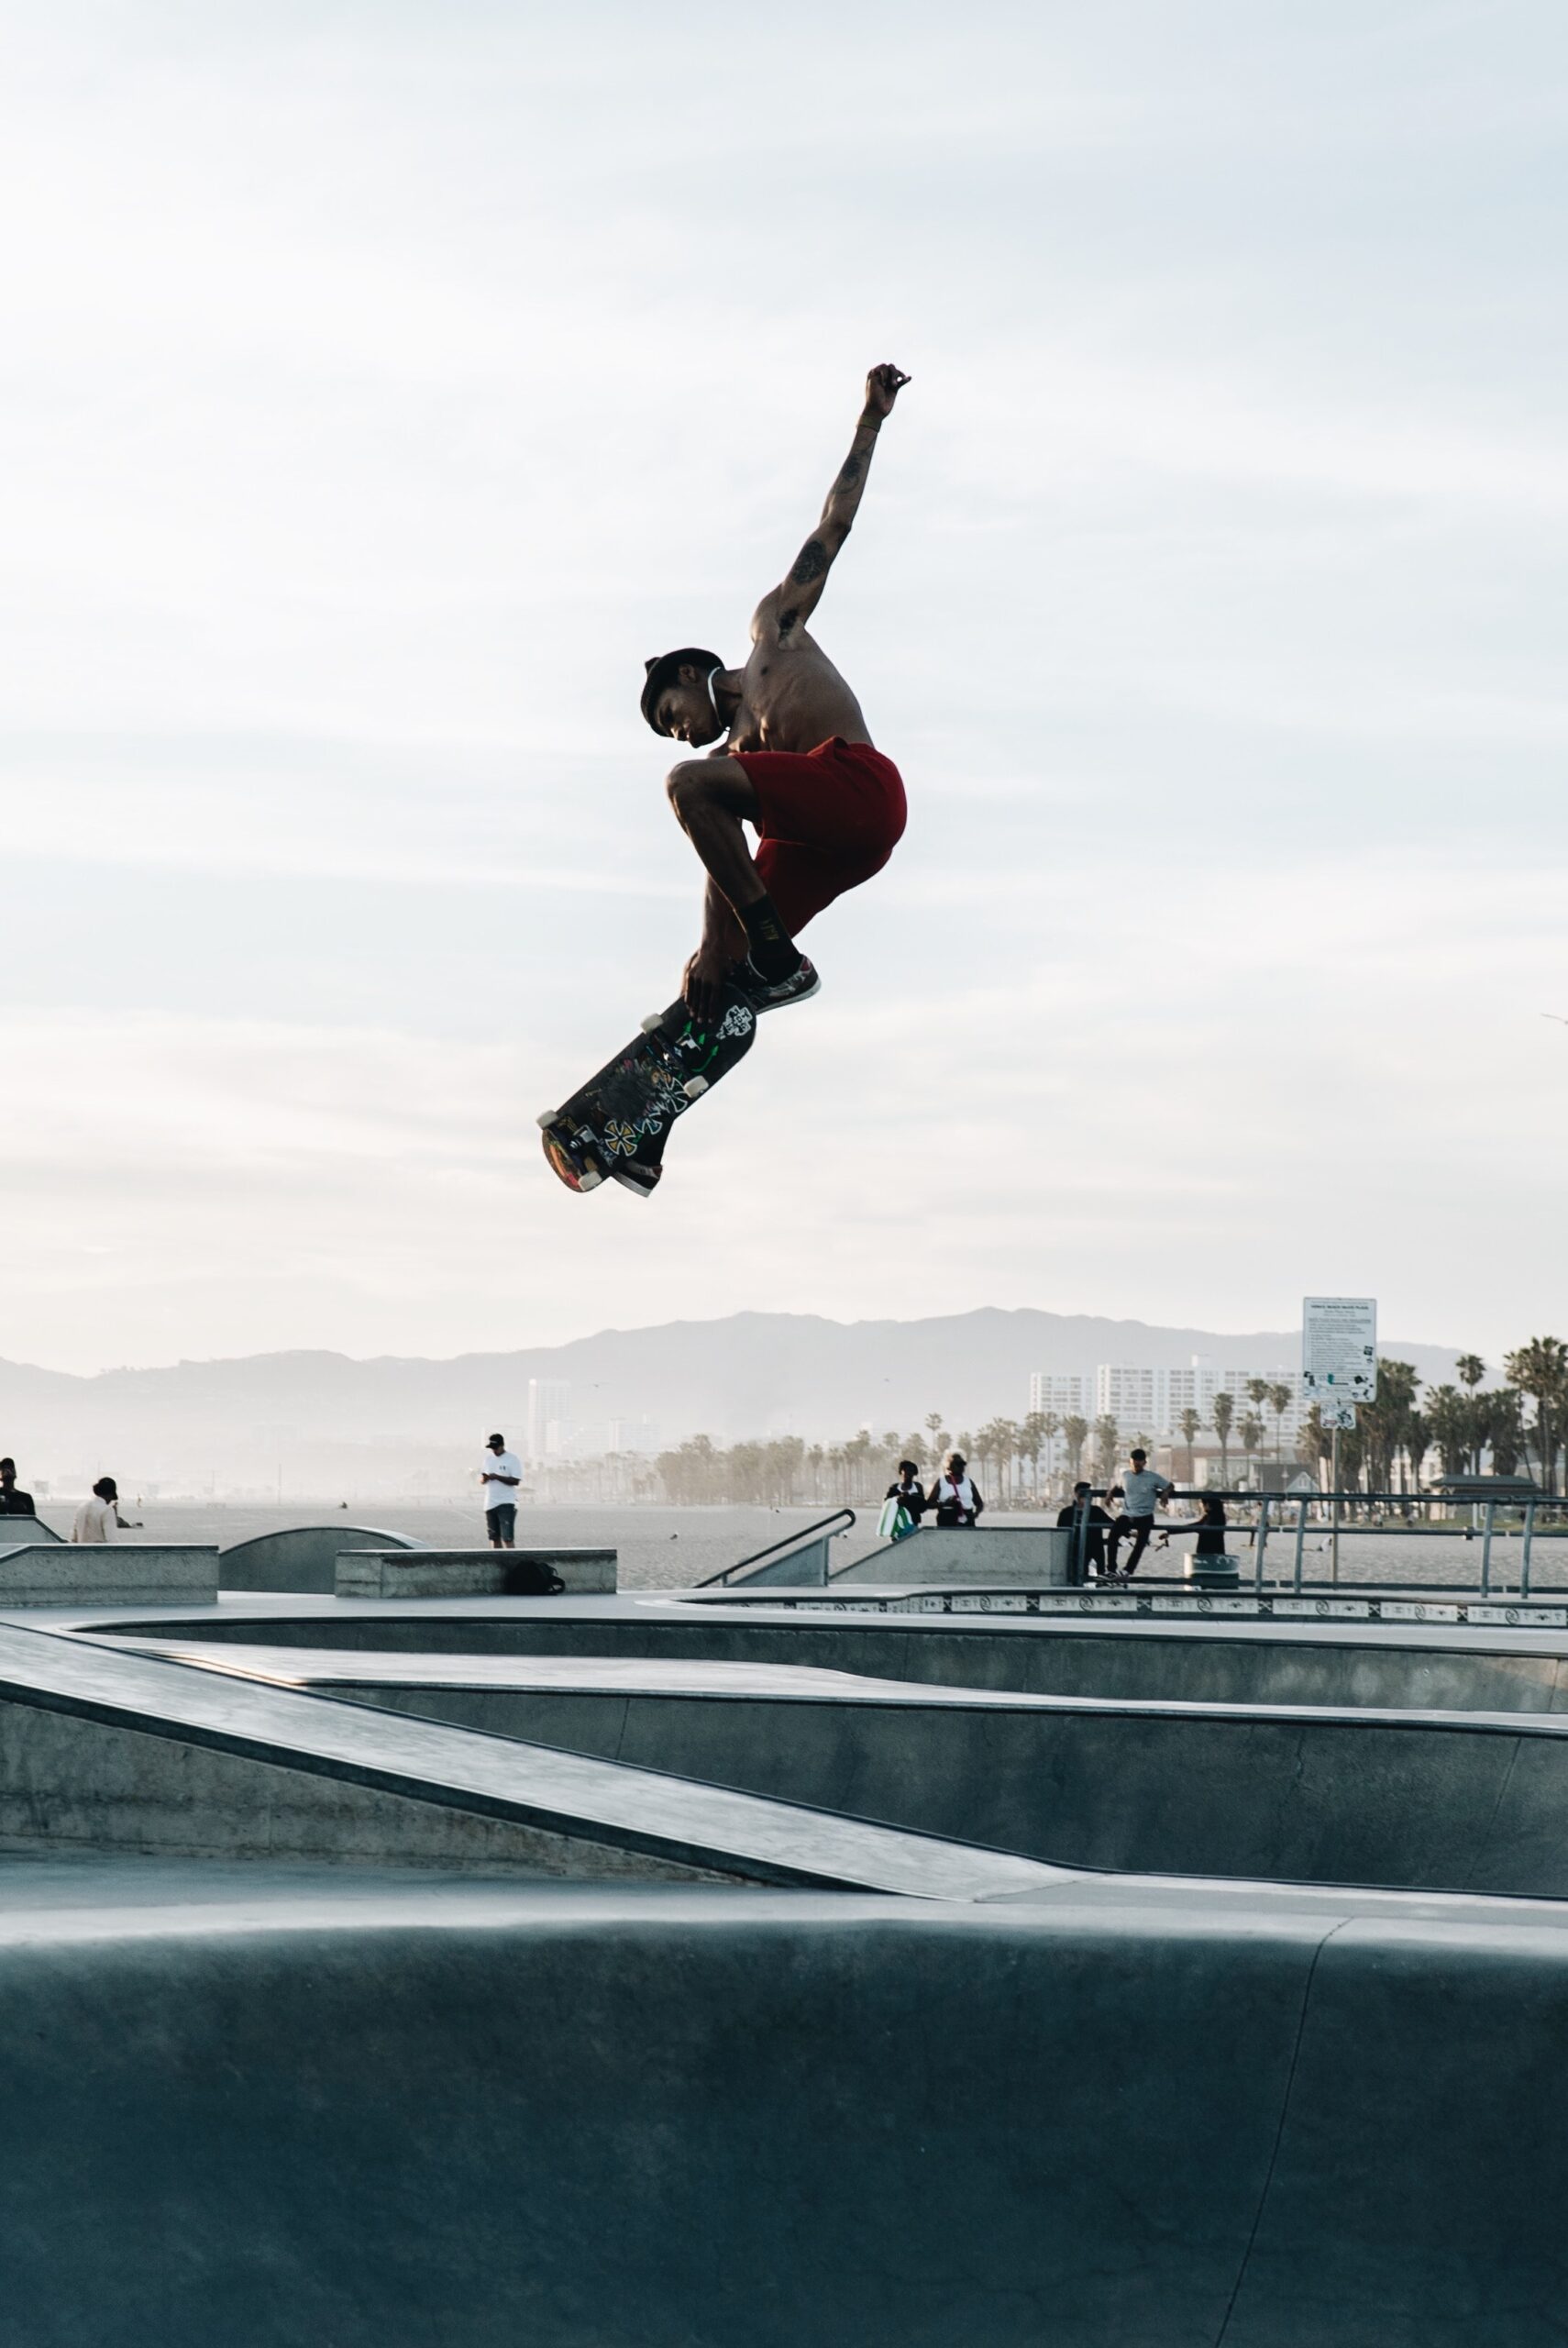 Can You Explain The Process Of Learning To Drop In At A Skate Park?